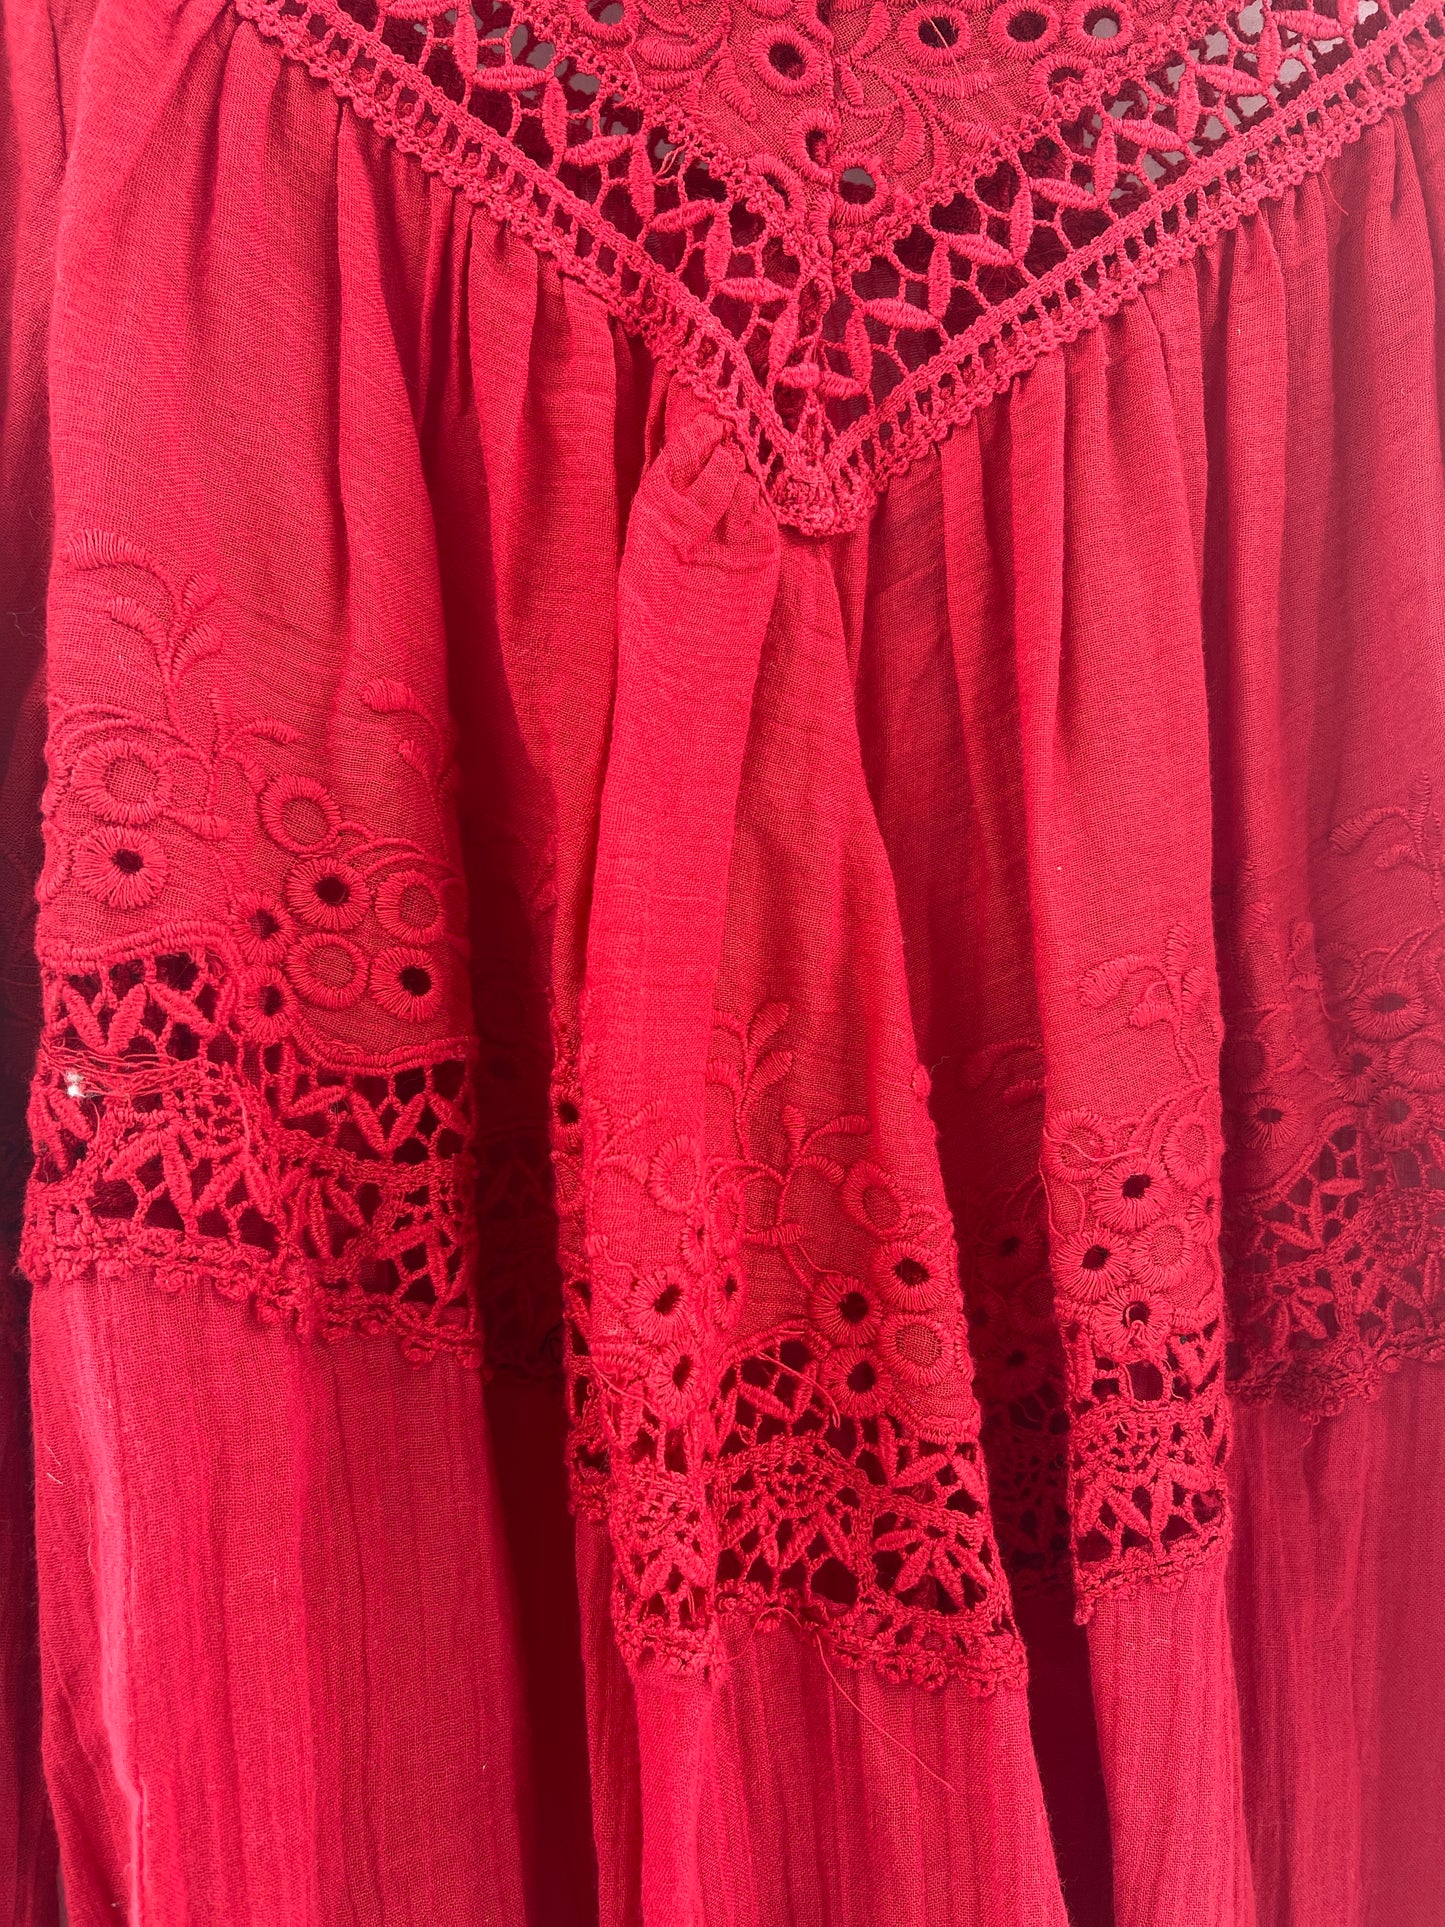 Free People Red Ribbon + Lace Blouse (S)